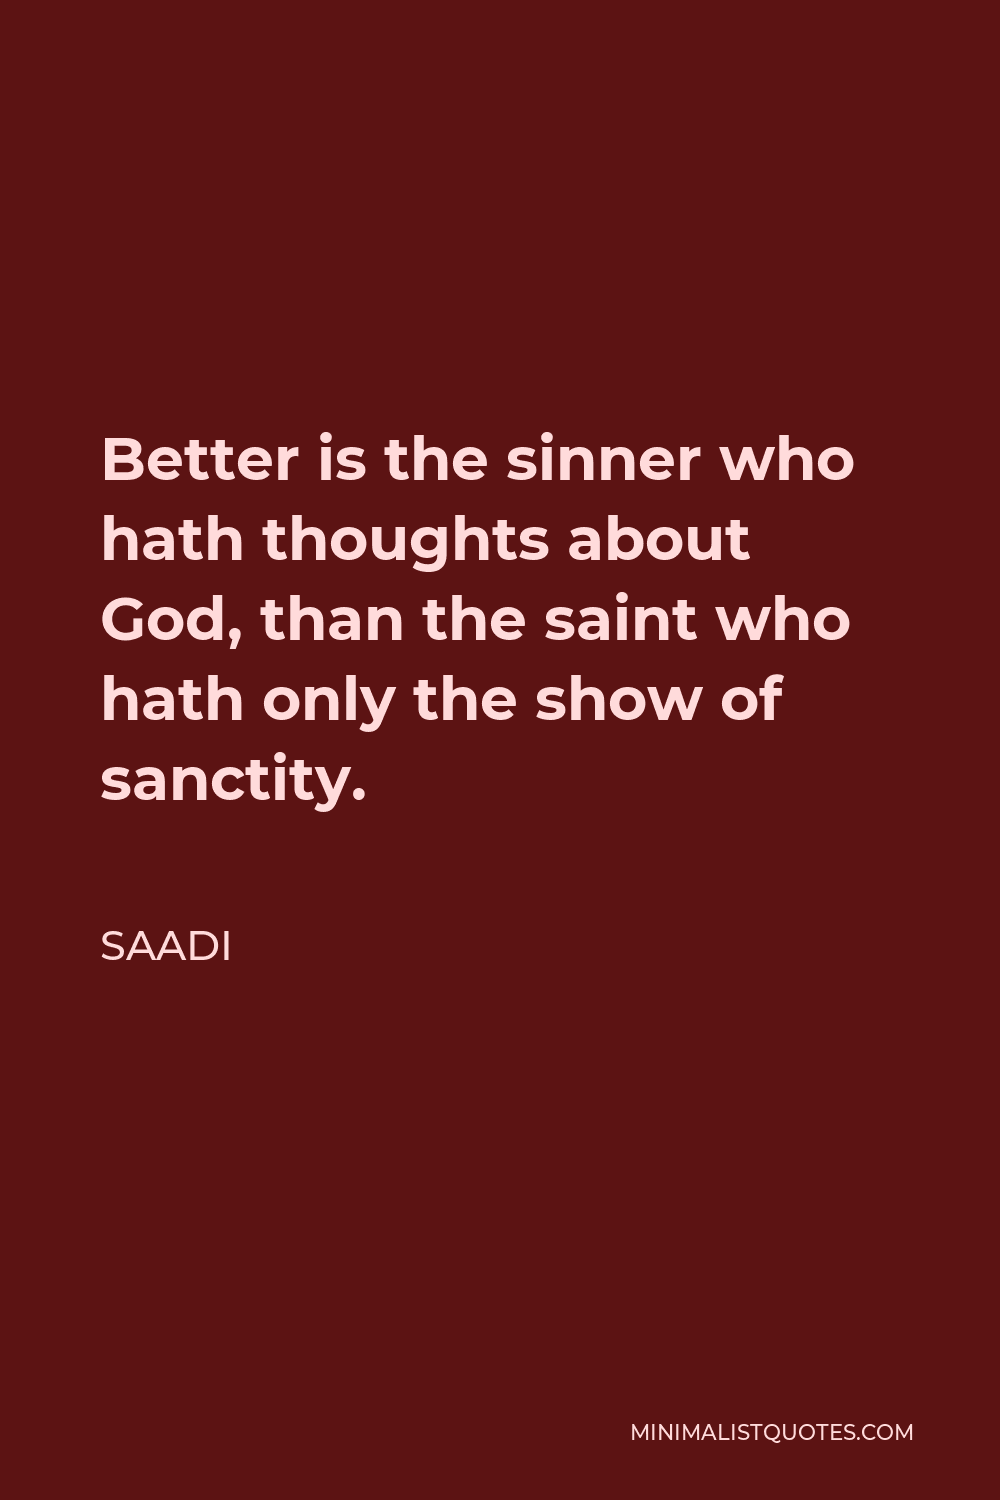 Saadi Quote - Better is the sinner who hath thoughts about God, than the saint who hath only the show of sanctity.